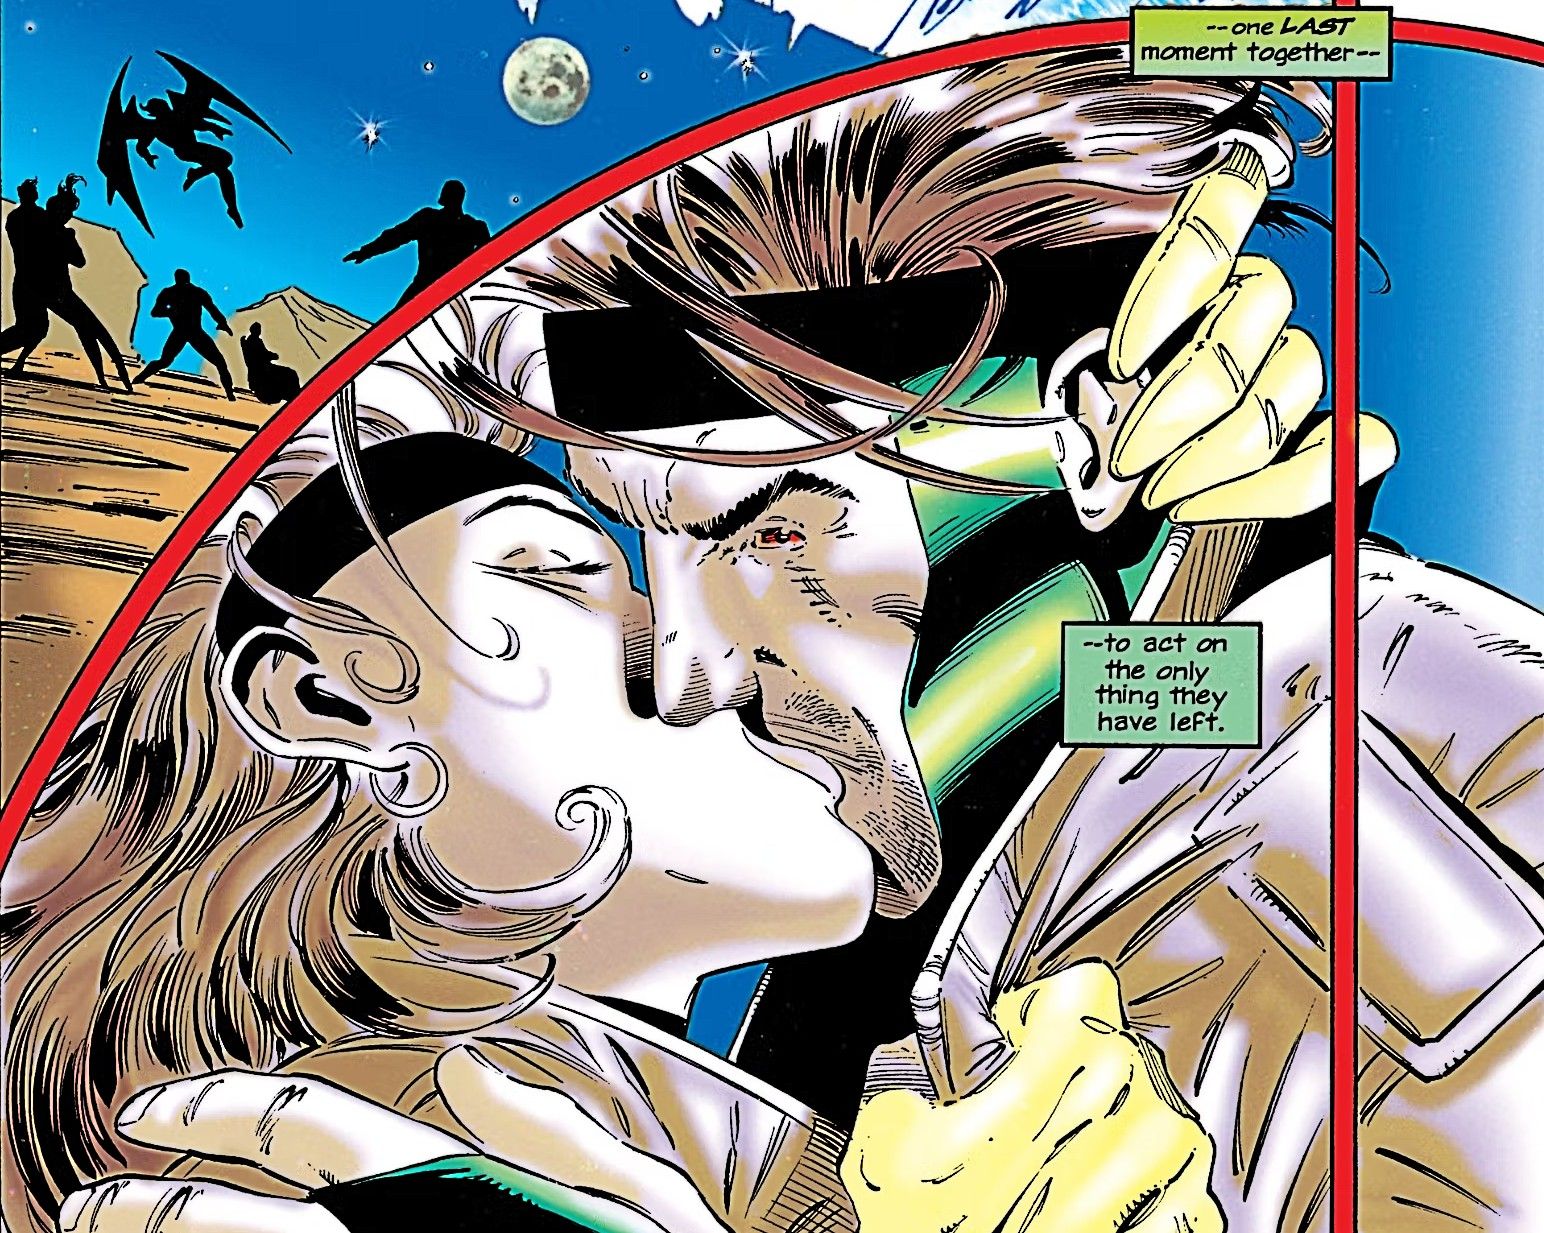 Rogue and Gambit share their first kiss